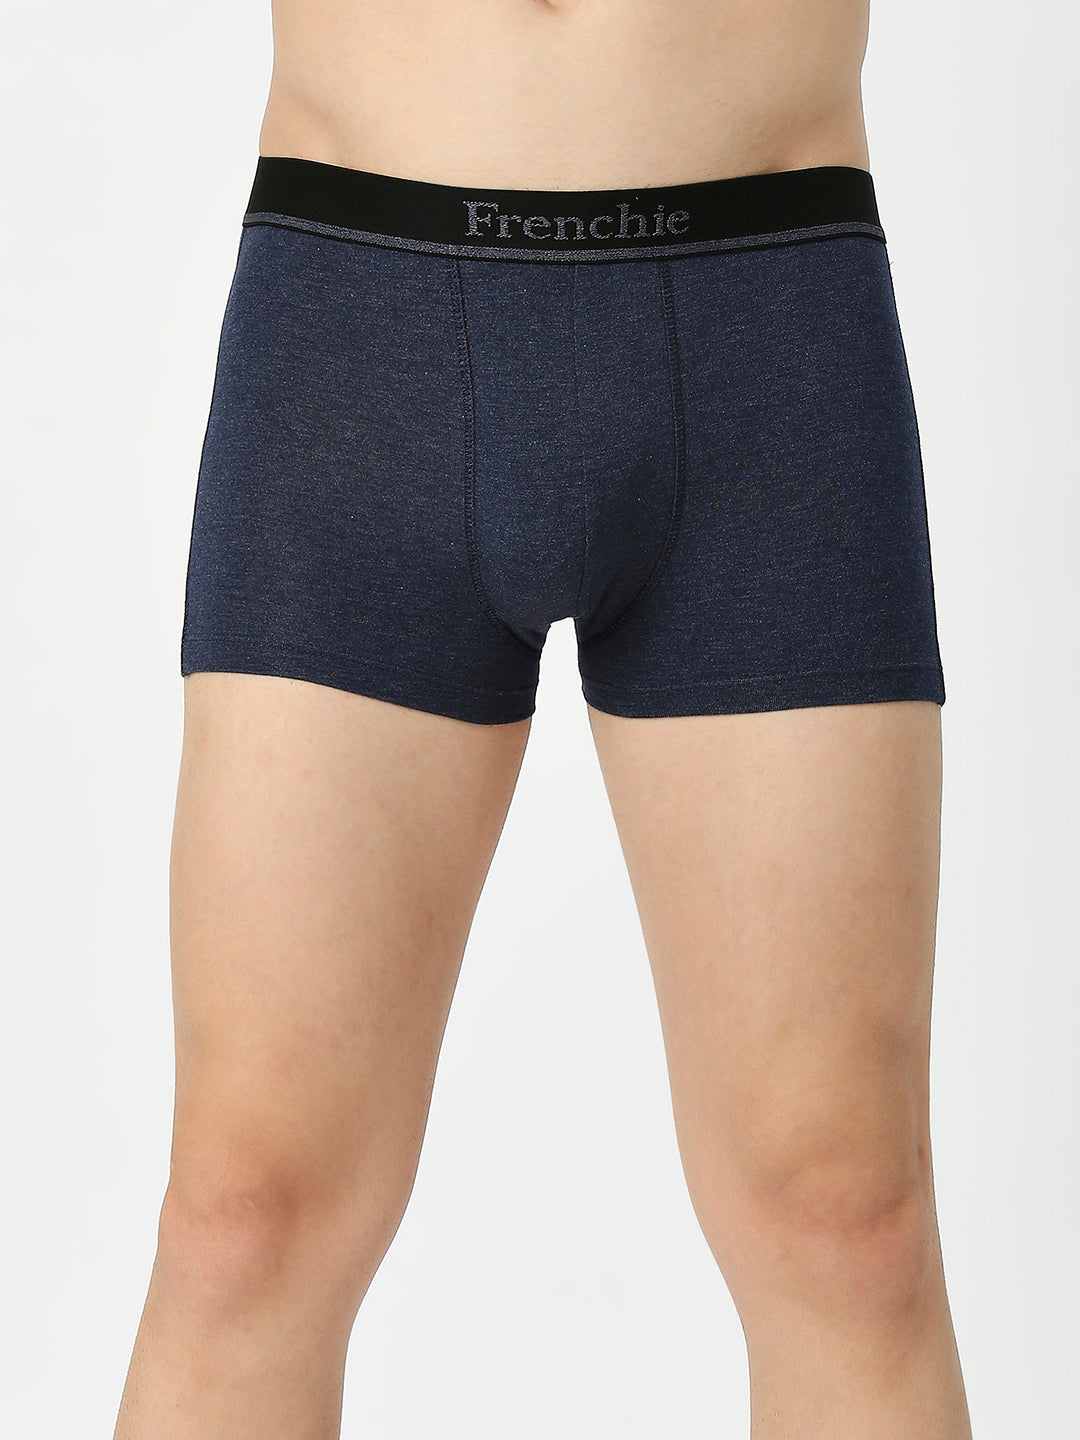 Trunks for Men  Buy Cotton Trunks Online in India at Best Price